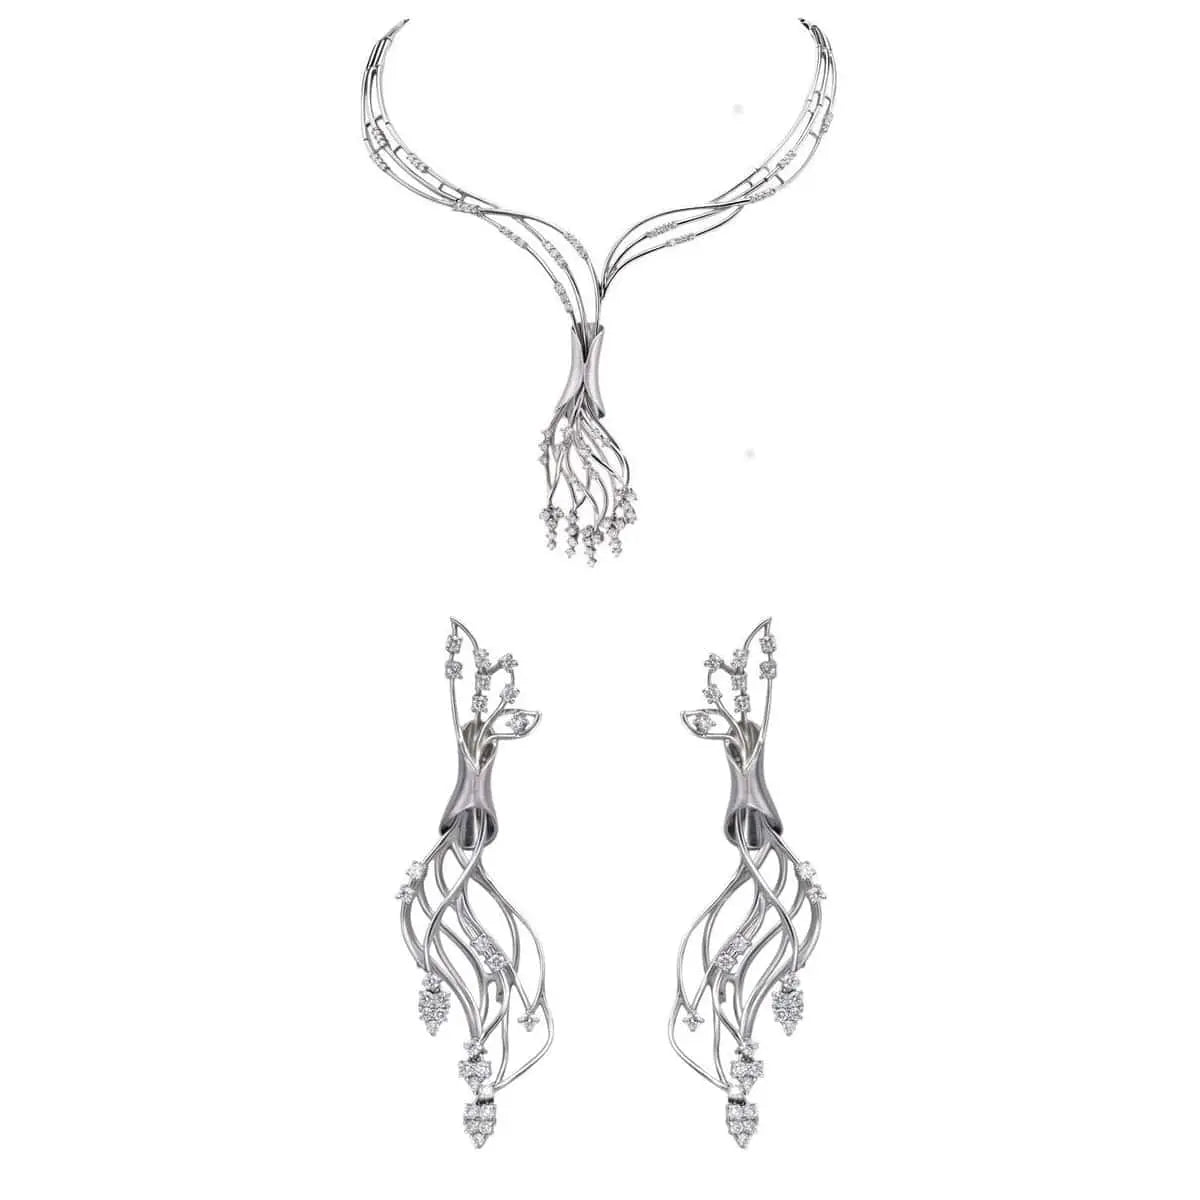 Jewelry Sketches